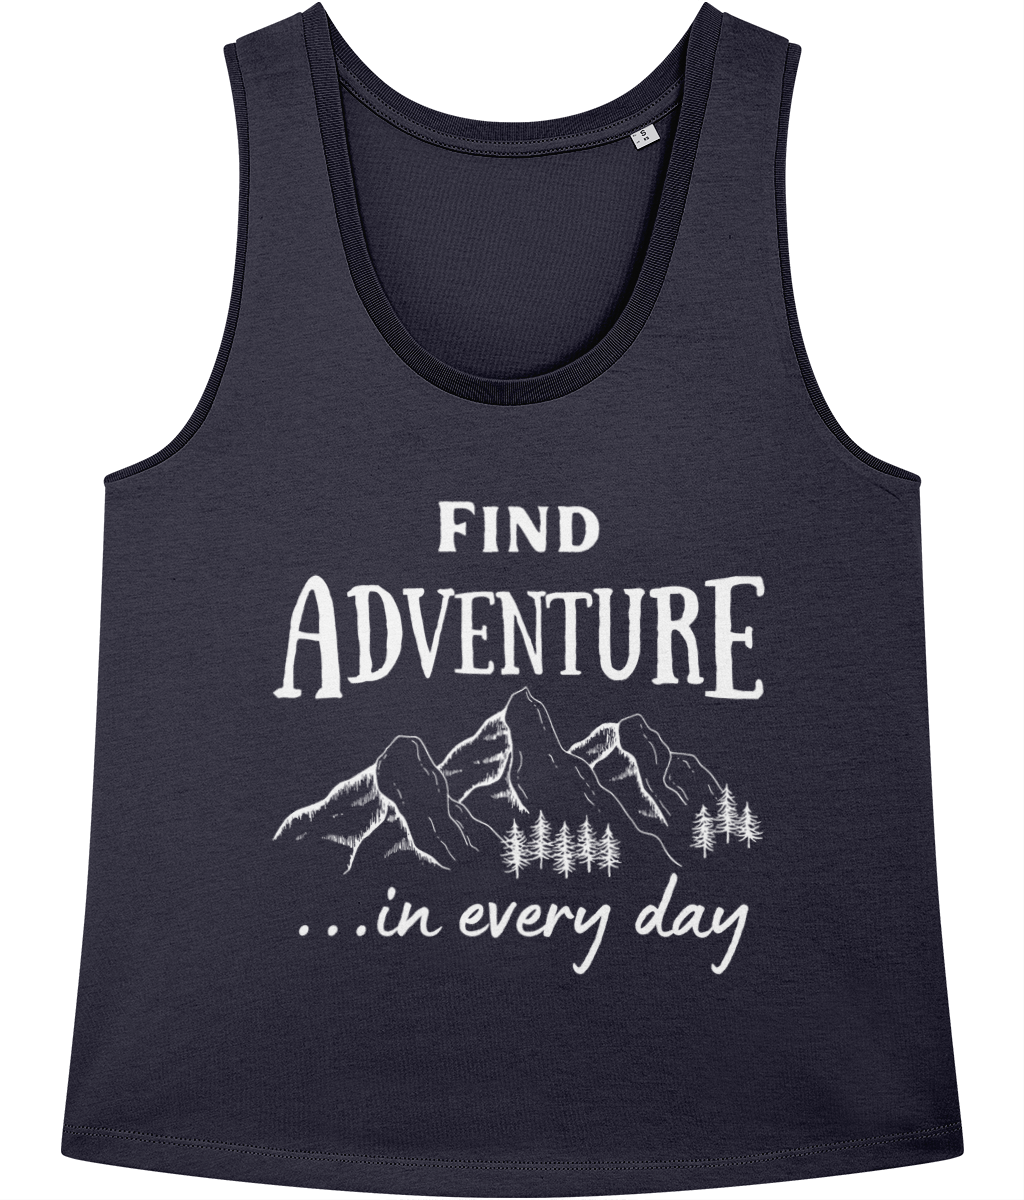 Find Adventure In Every Day Unisex 100% Organic Cotton Vest Top